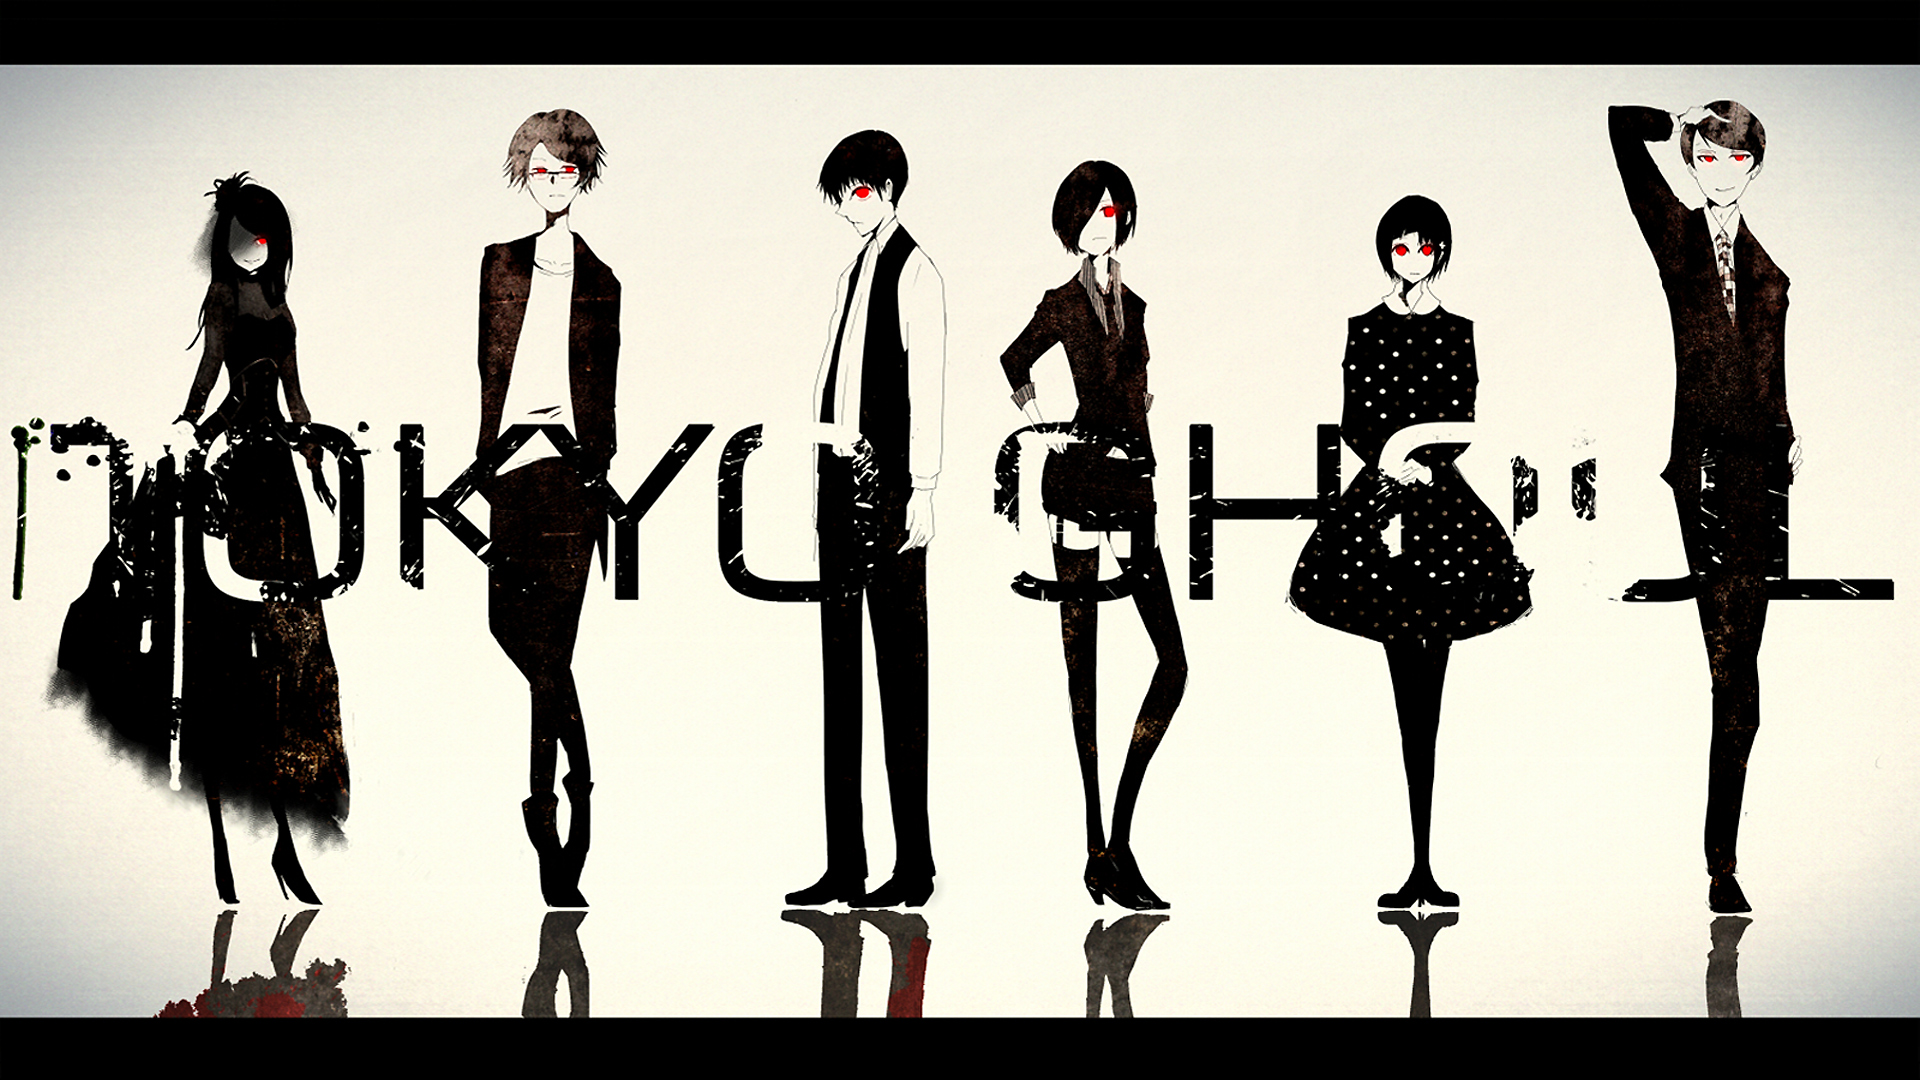 currently viewing Tokyo Ghoul Wallpaper Download this Full HD High 1920x1080